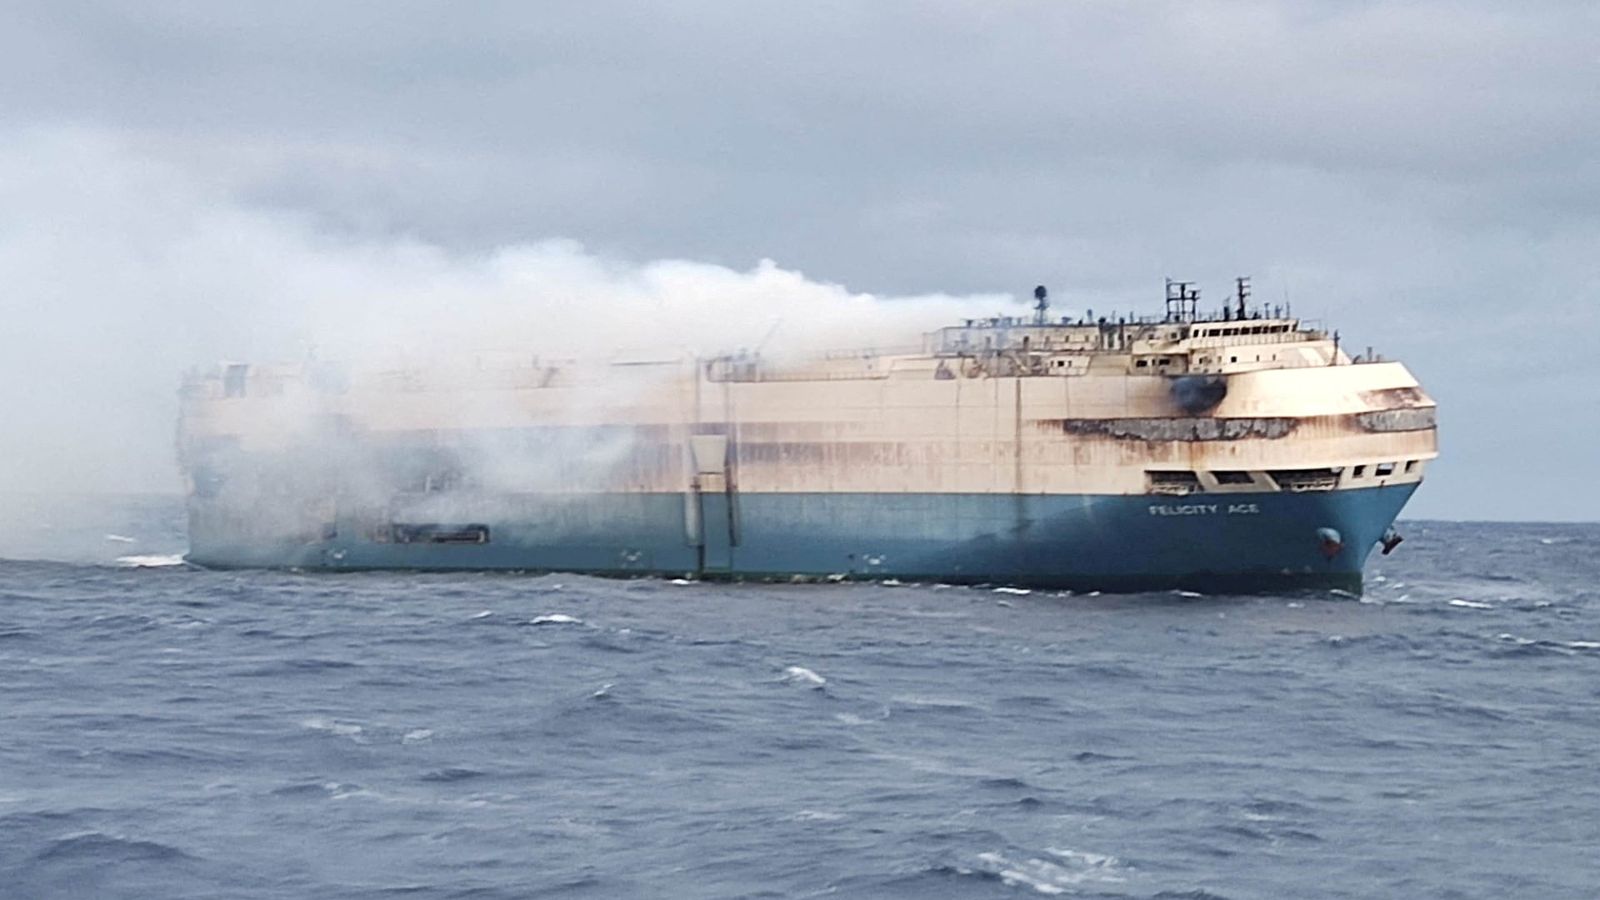 Cargo ship carrying thousands of luxury cars sinks after catching fire